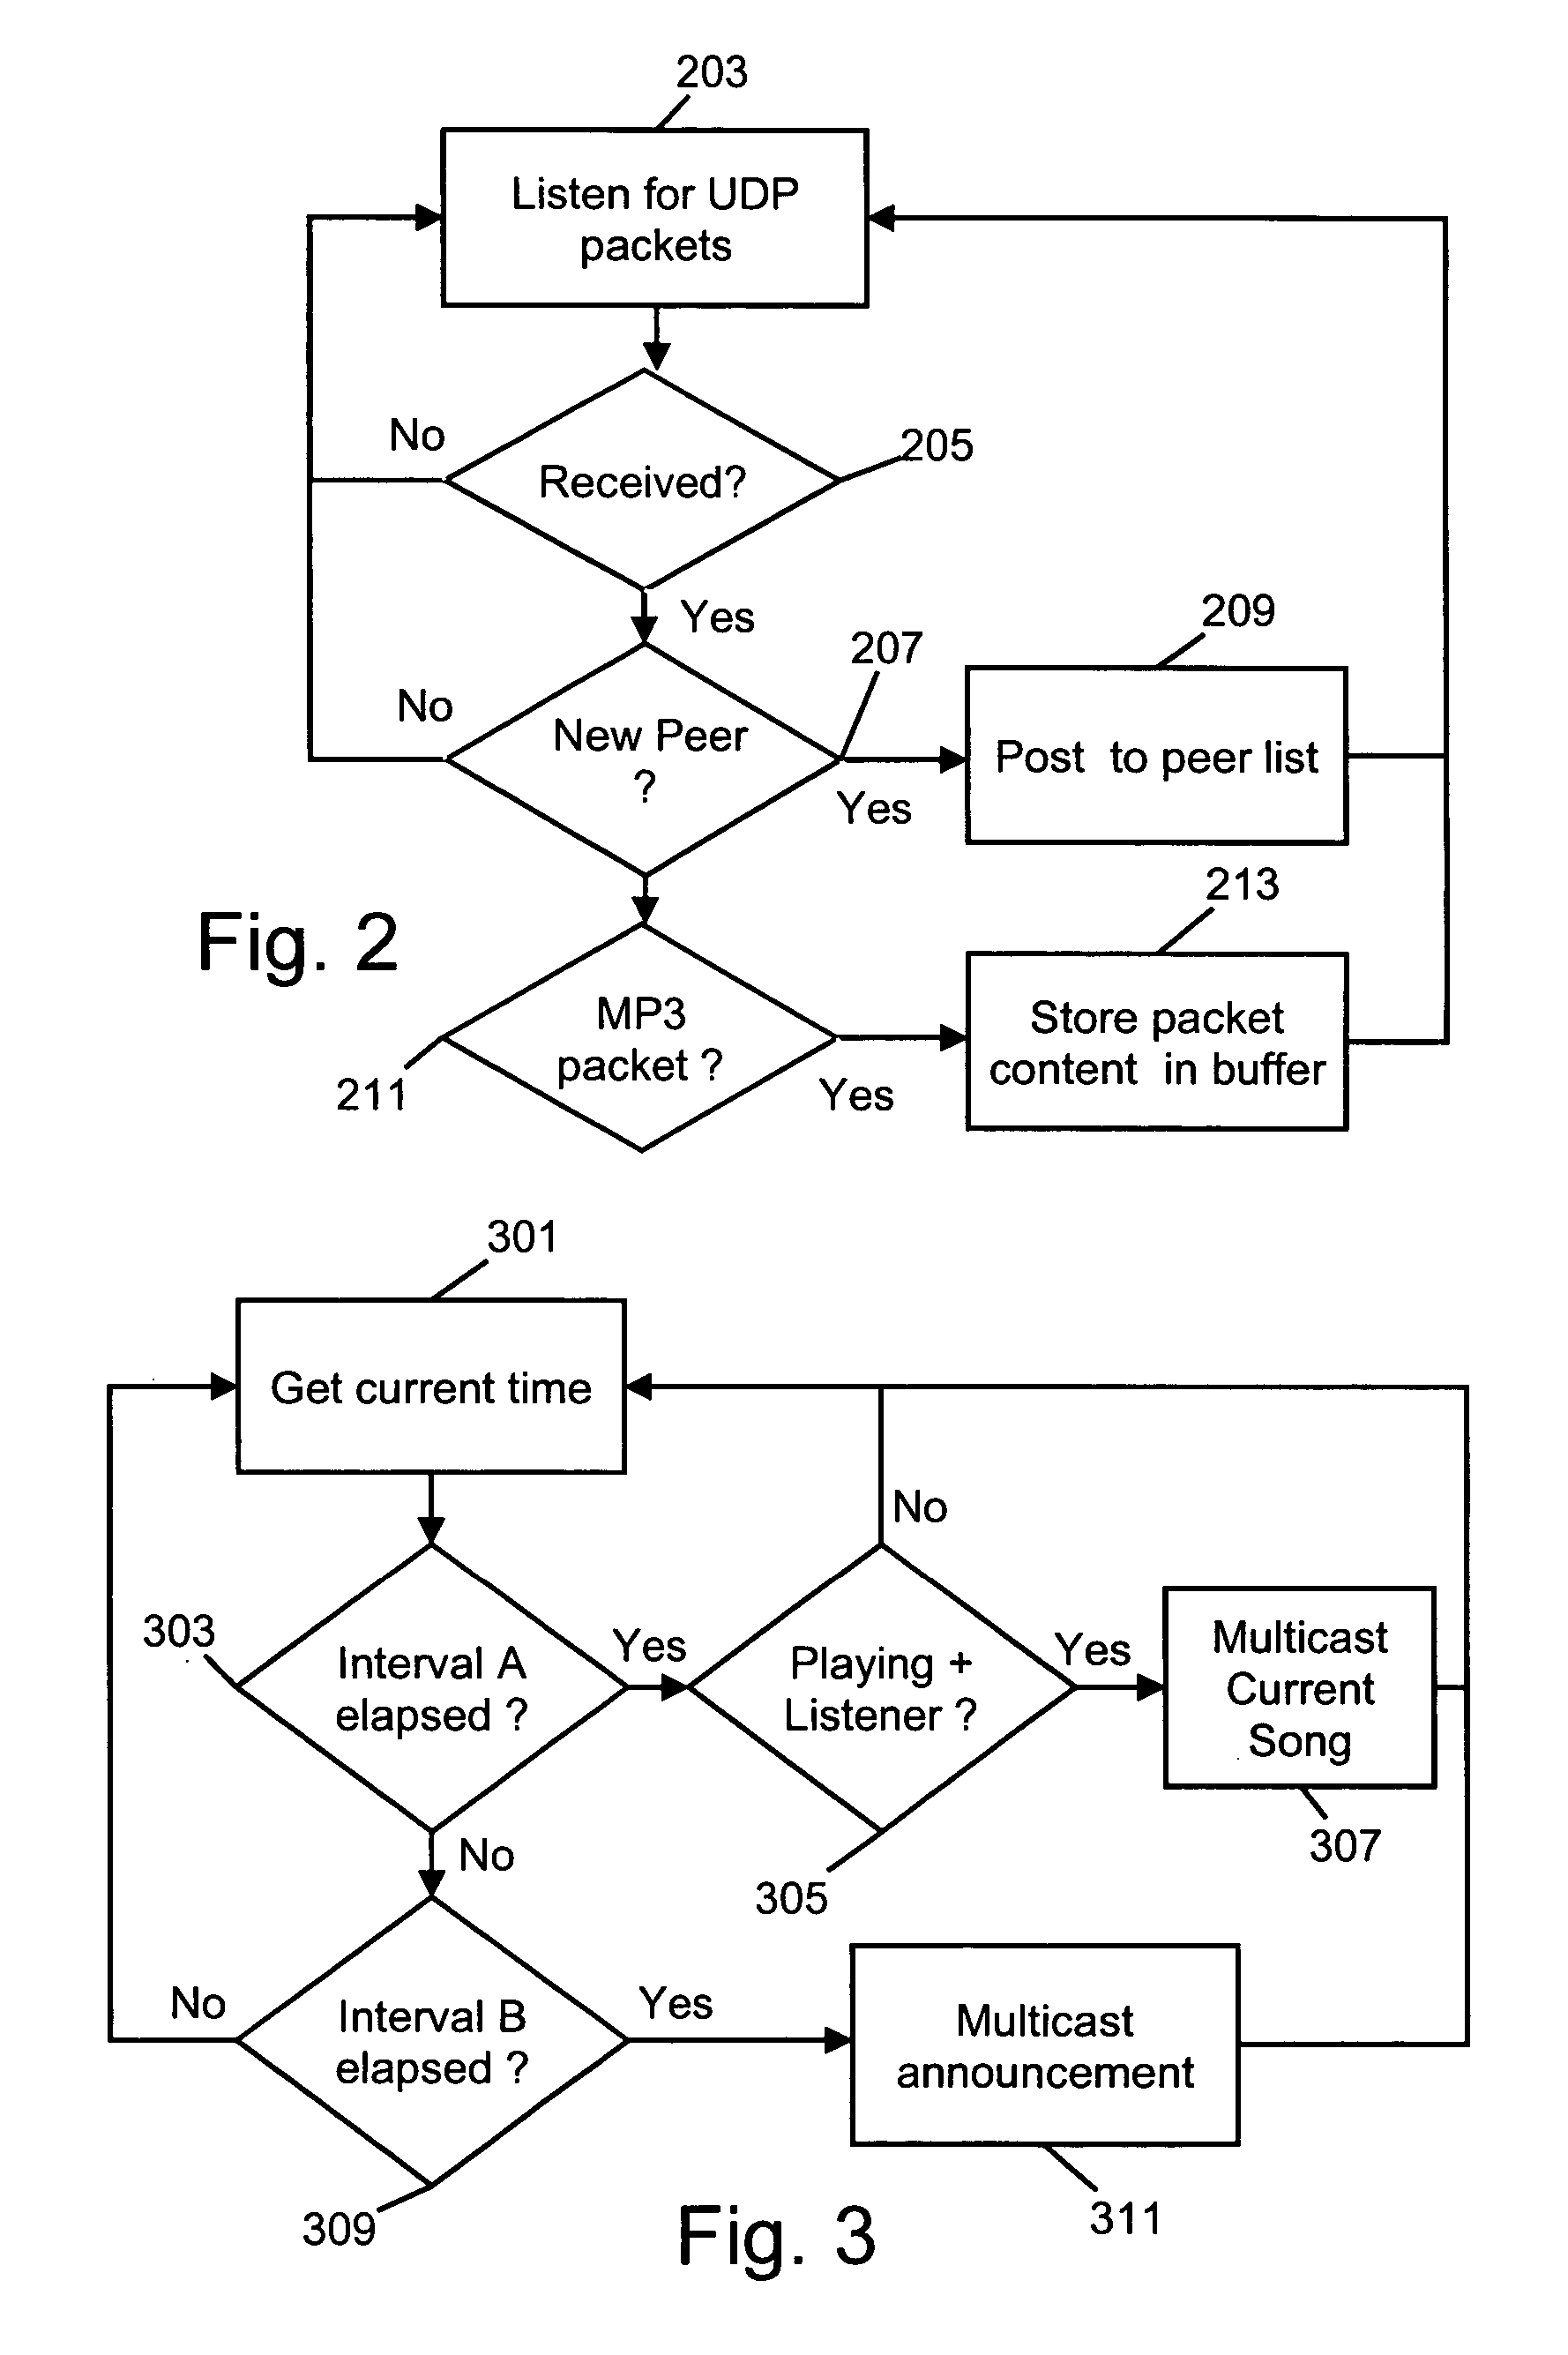 Synchronized media streaming between distributed peers